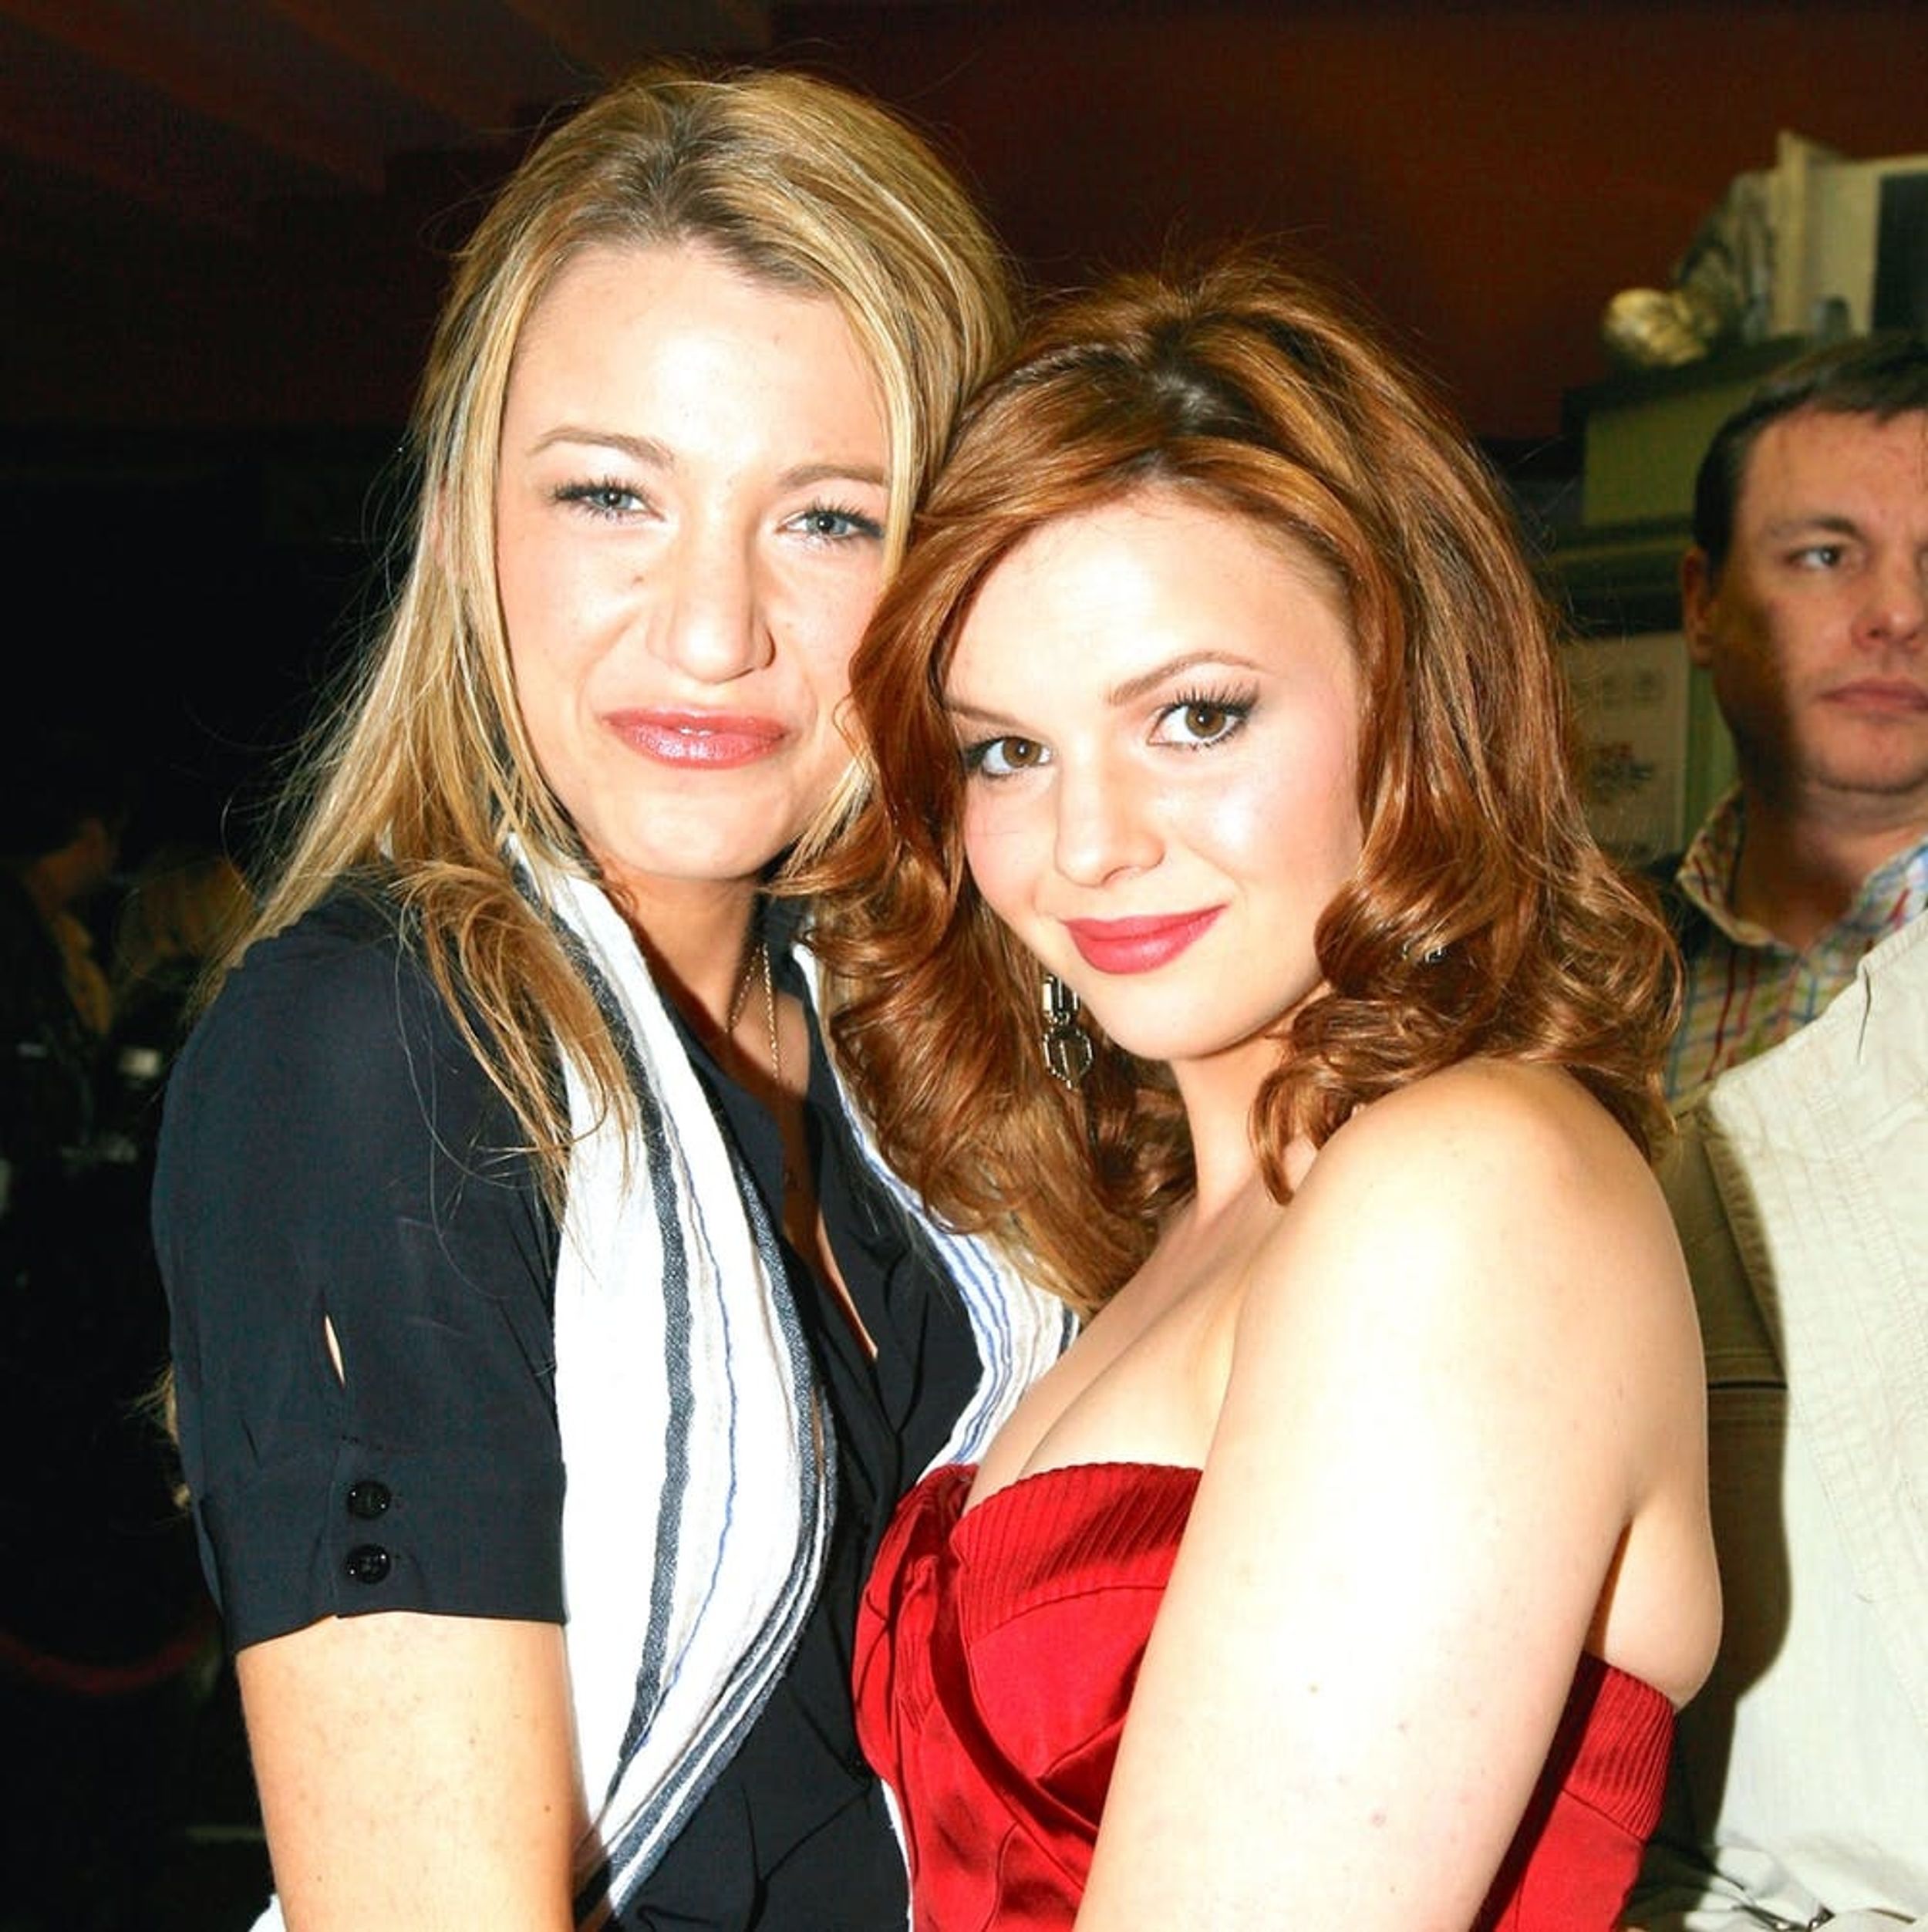 The Photo Proof That Blake Lively + Amber Tamblyn Double Date Is Amazing